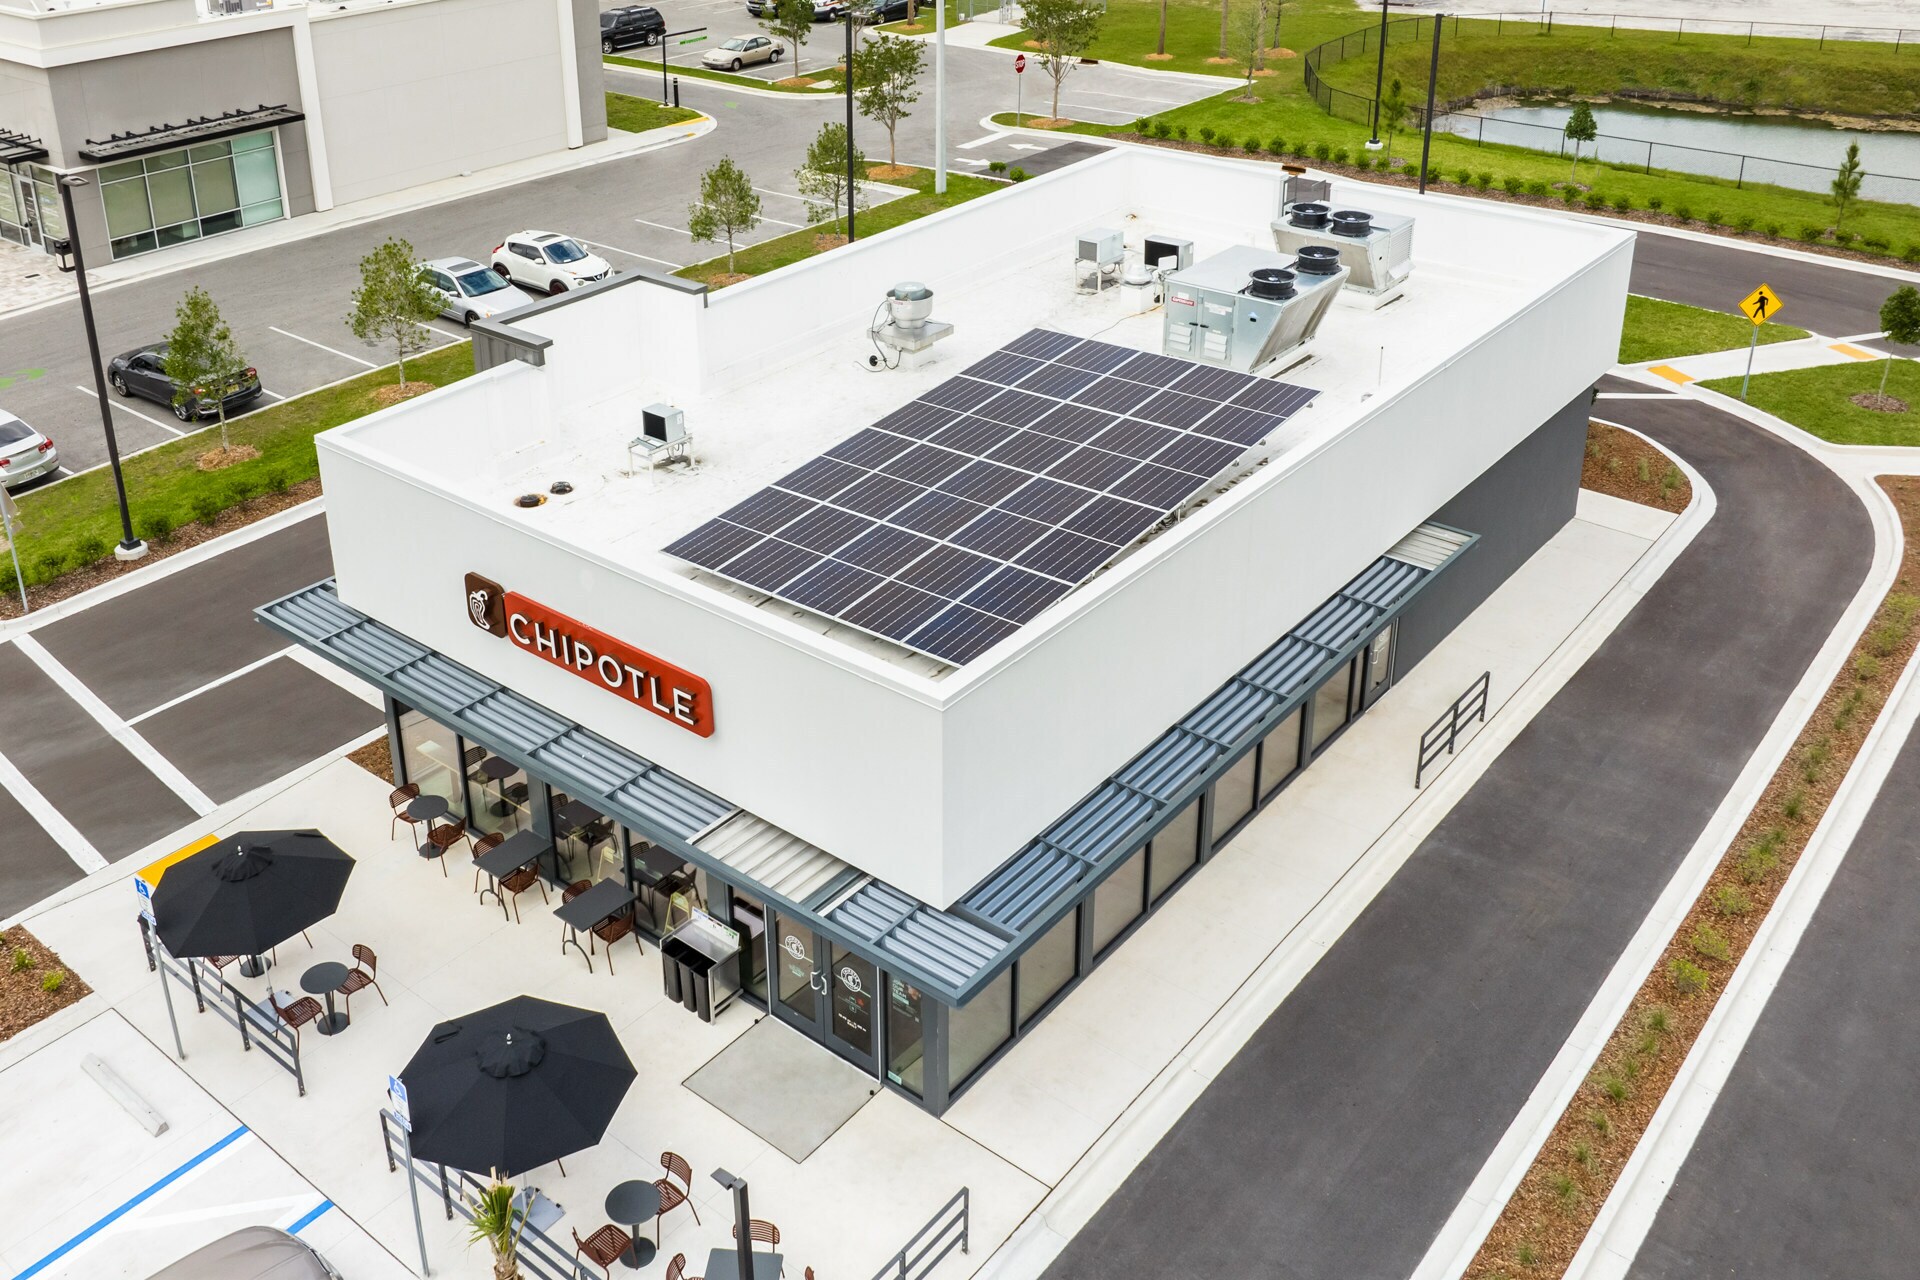 Chipotle Mexican Grill is testing three prototypes of its all-electric restaurant design, including this site in Jacksonville, Florida. (Chipotle Mexican Grill)